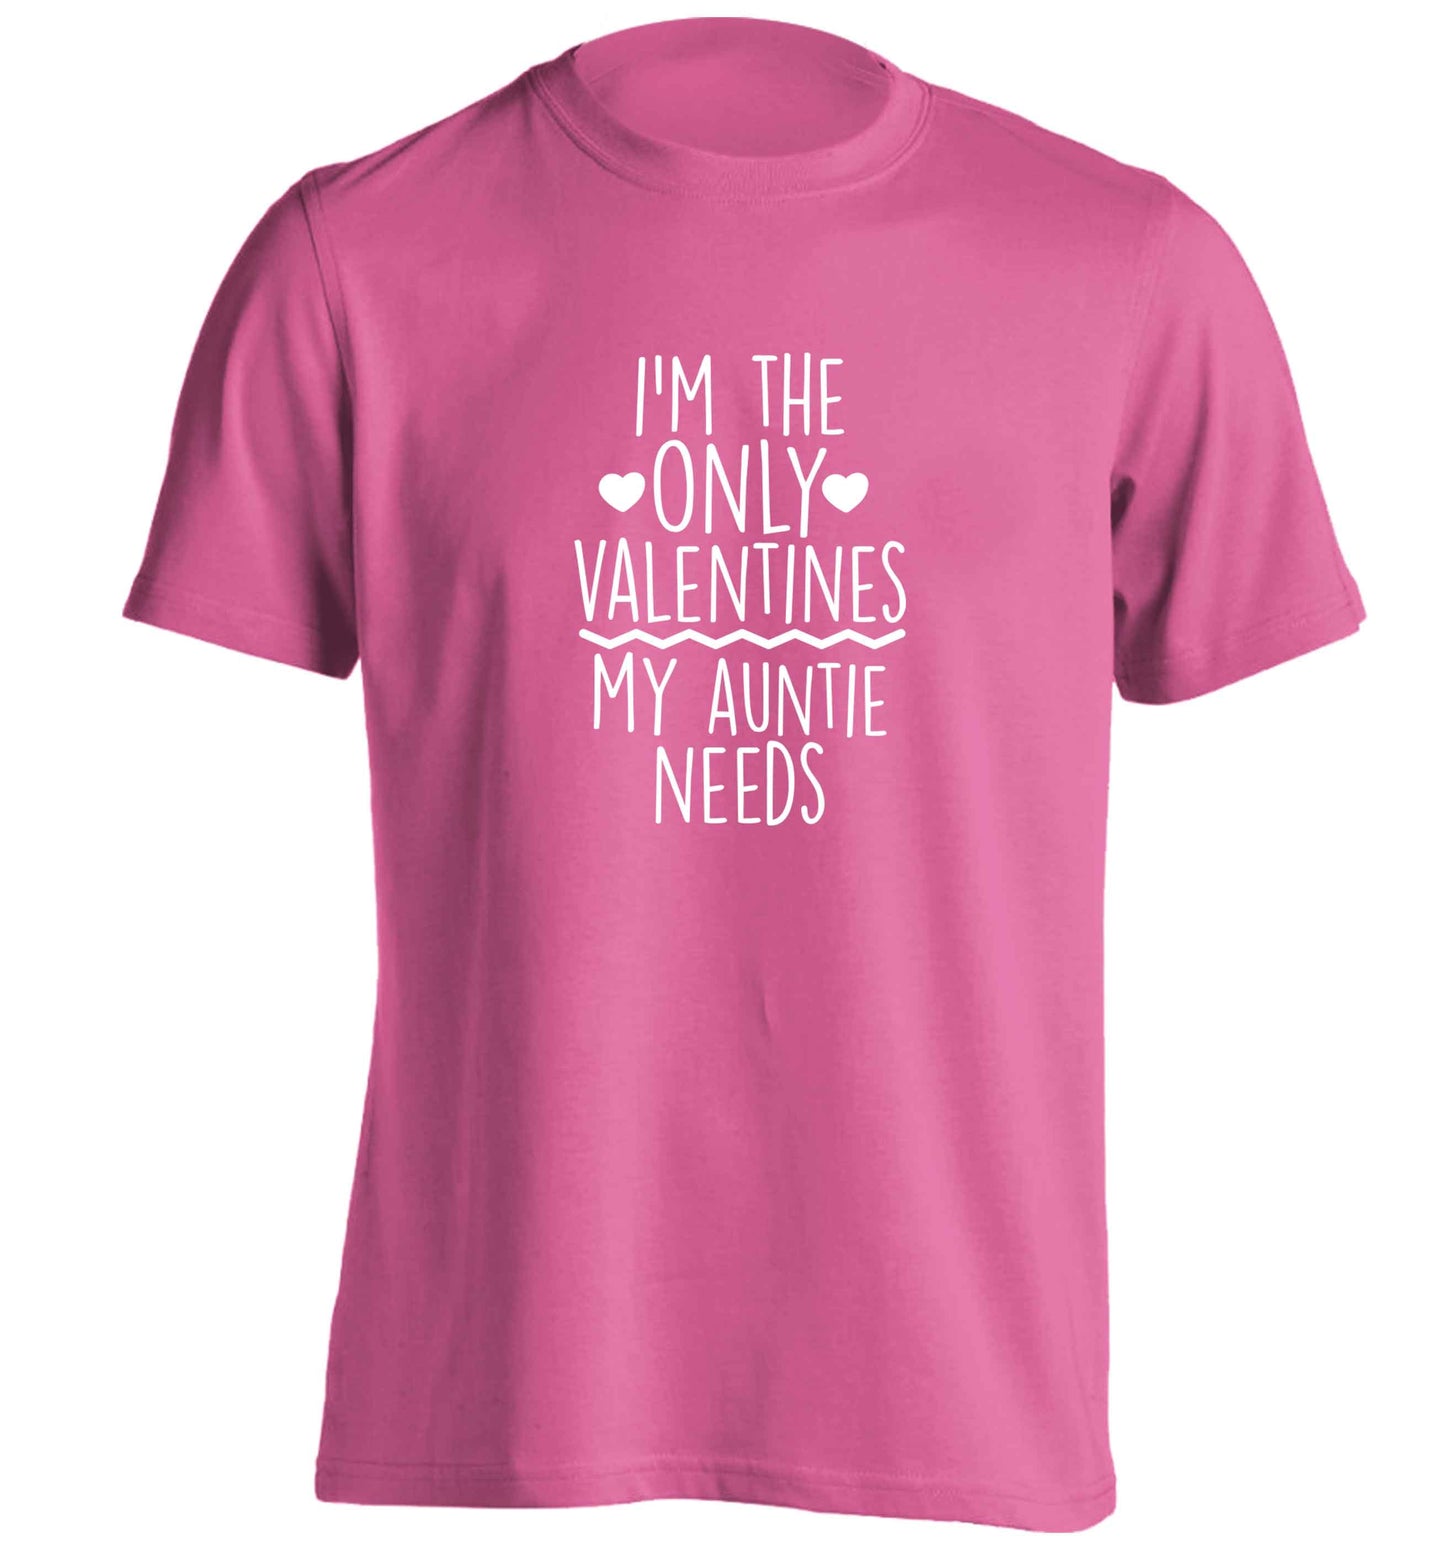 I'm the only valentines my auntie needs adults unisex pink Tshirt 2XL